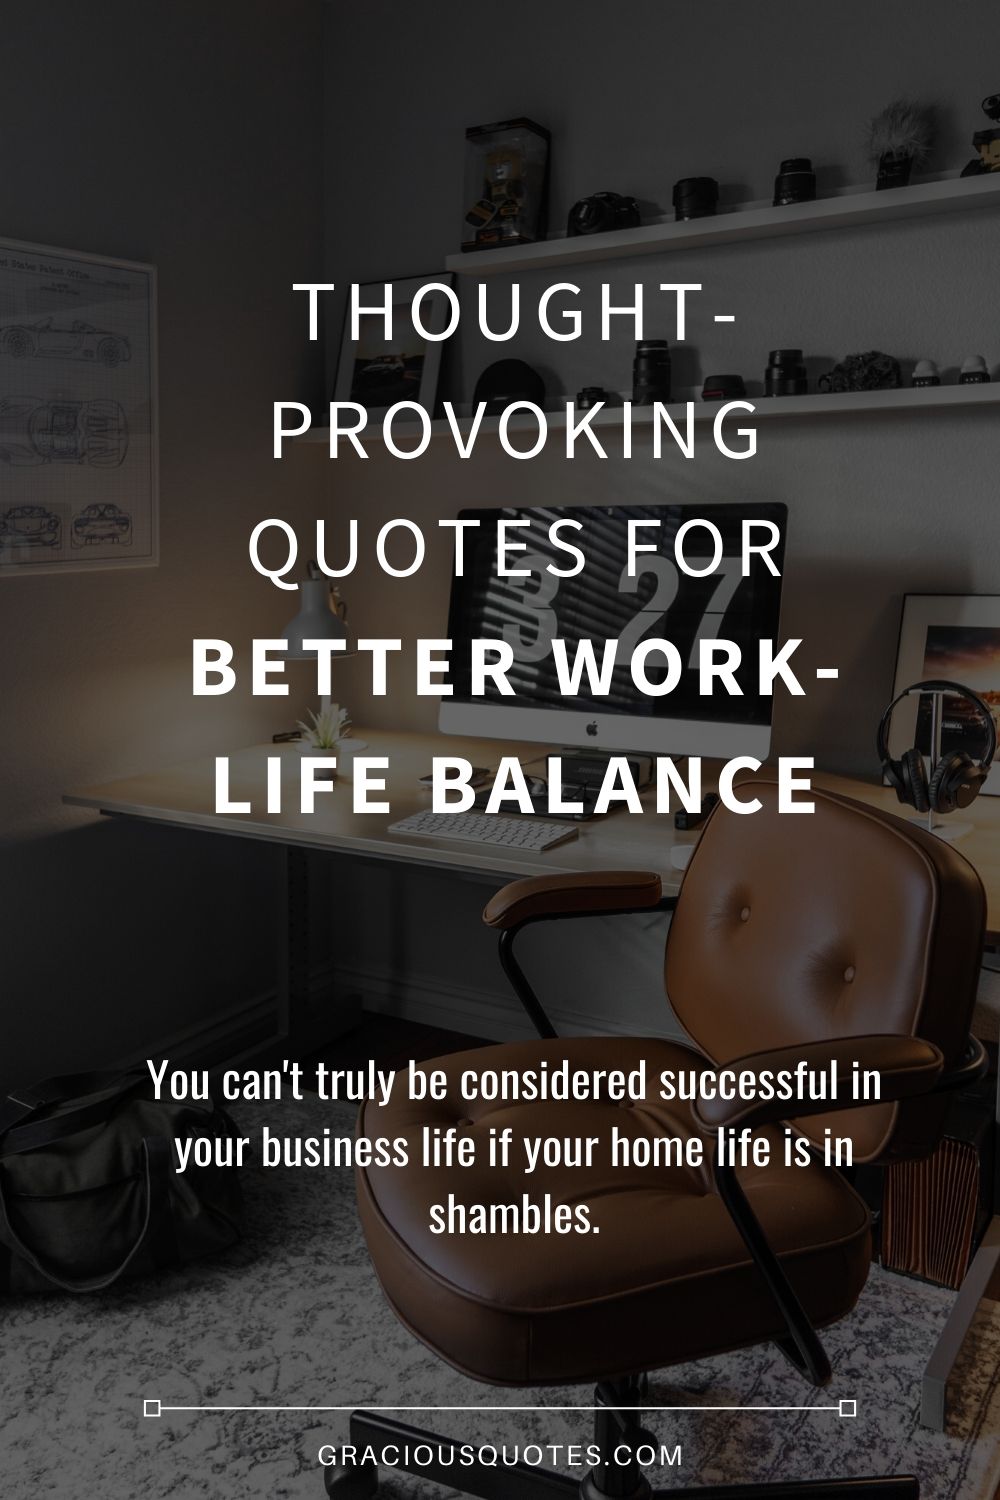 Thought-provoking-Quotes-for-Better-Work-life-Balance-Gracious-Quotes